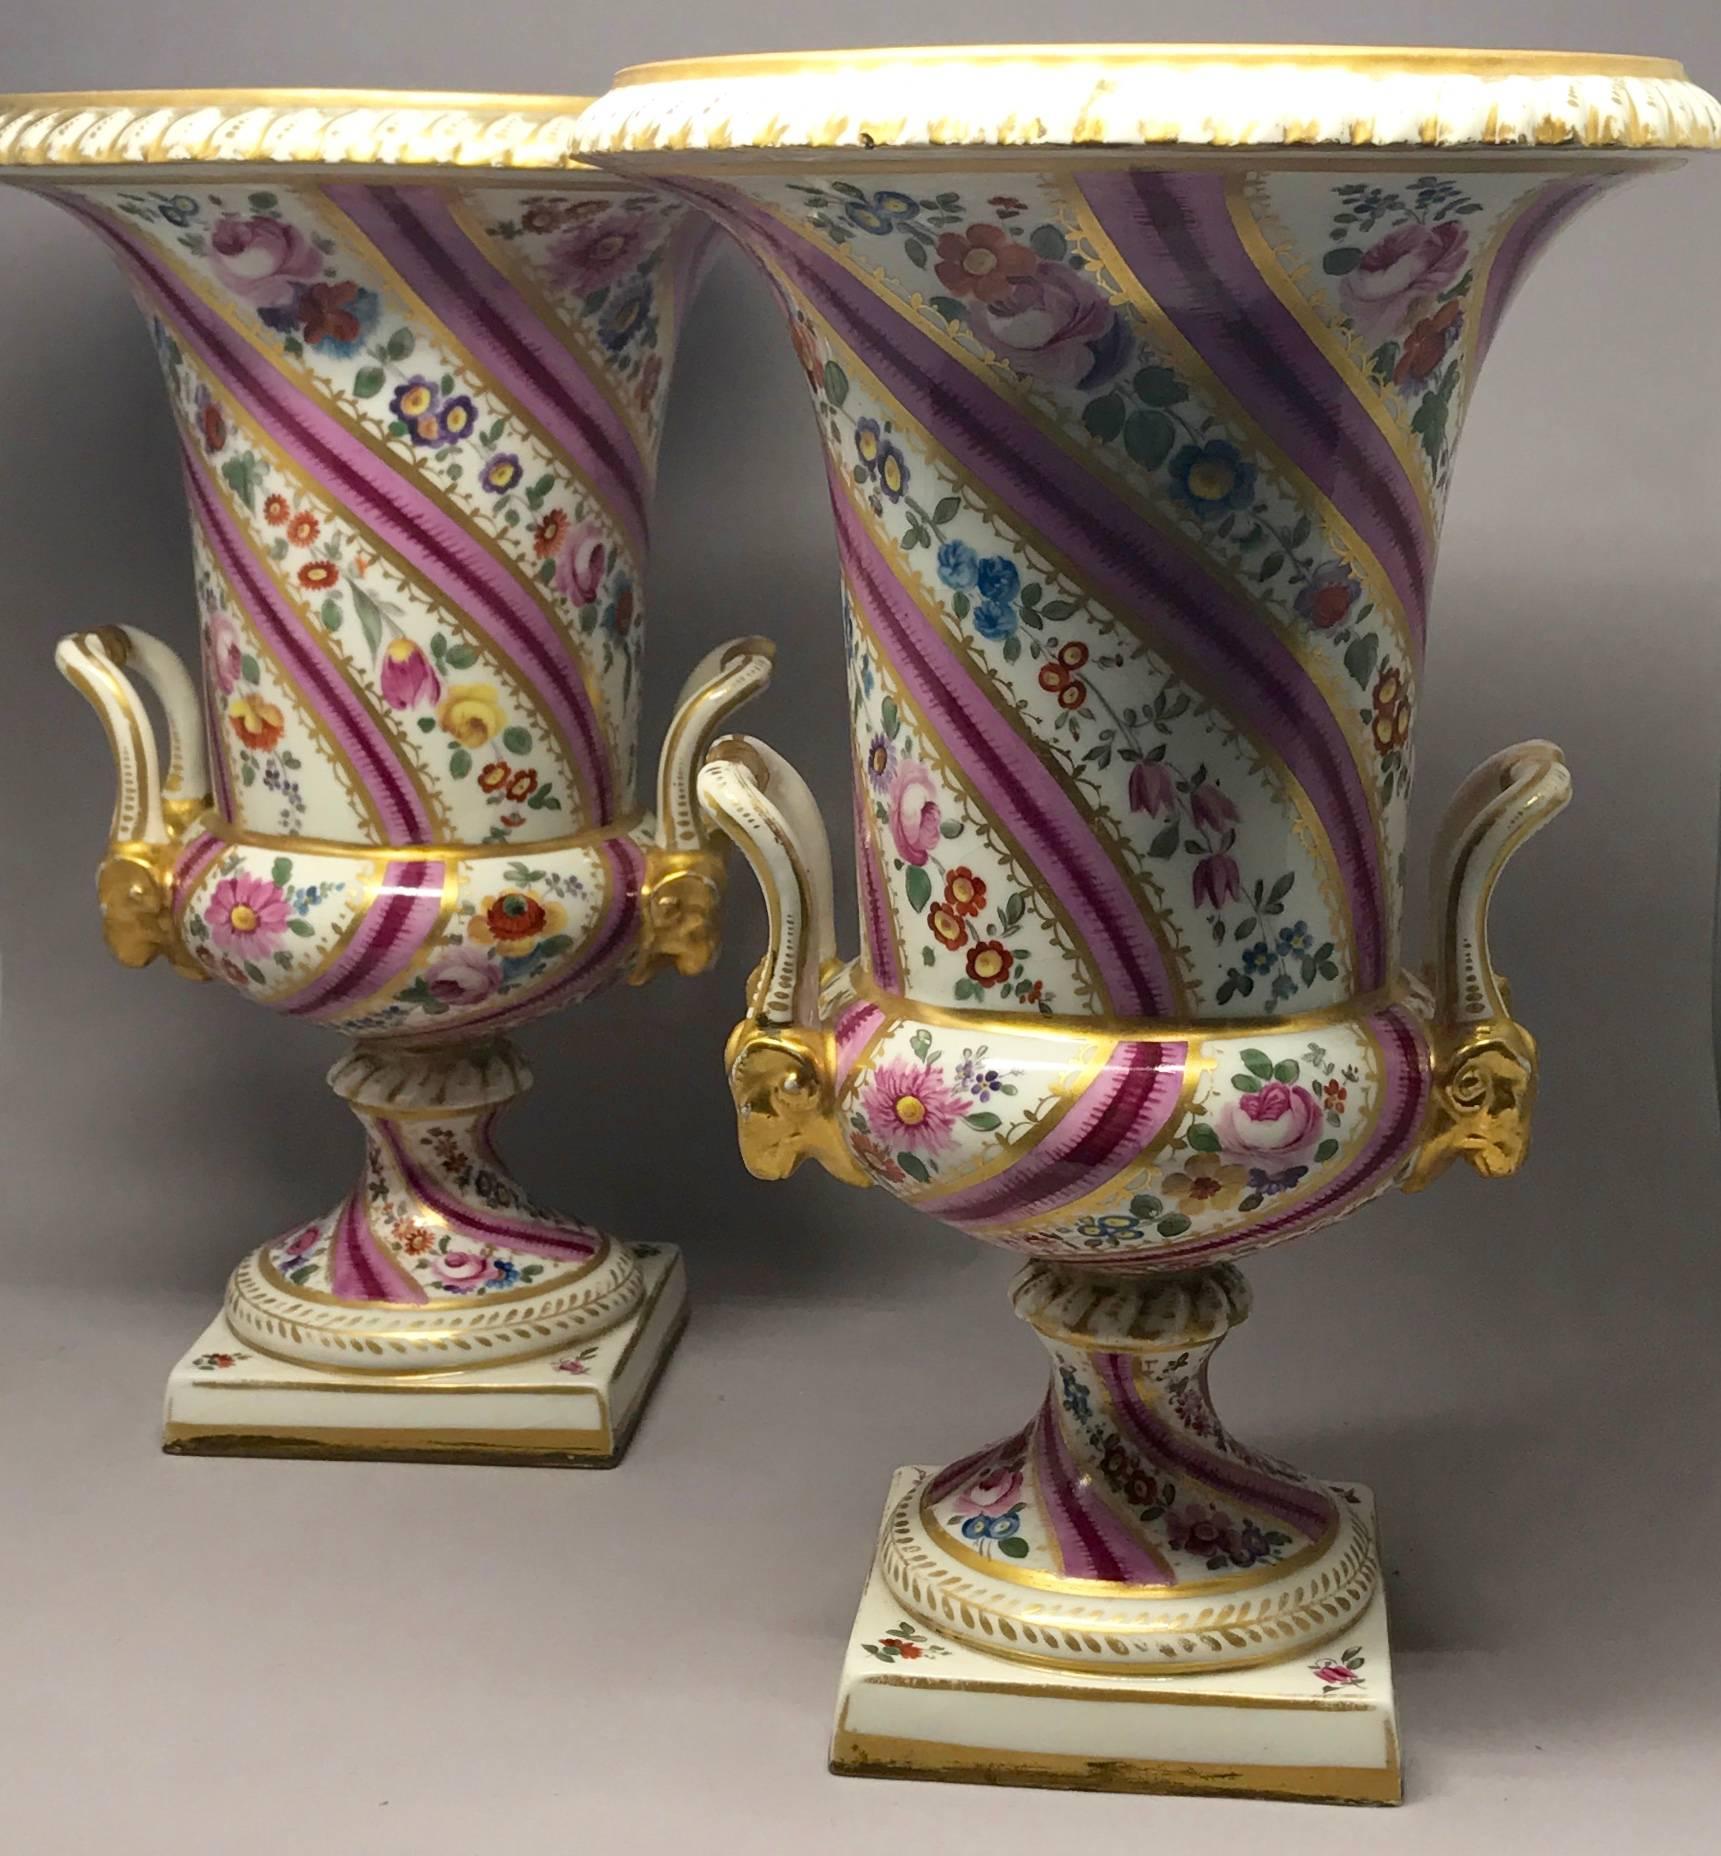 Pair pink floral and gilt porcelain painted urns. Pair urns with vibrant pink, mulberry and fuschia banding alternating with rich floral sprays on the two part body with rams' head handles. In the manner of Swansea, possibly made by Edmé Samson.